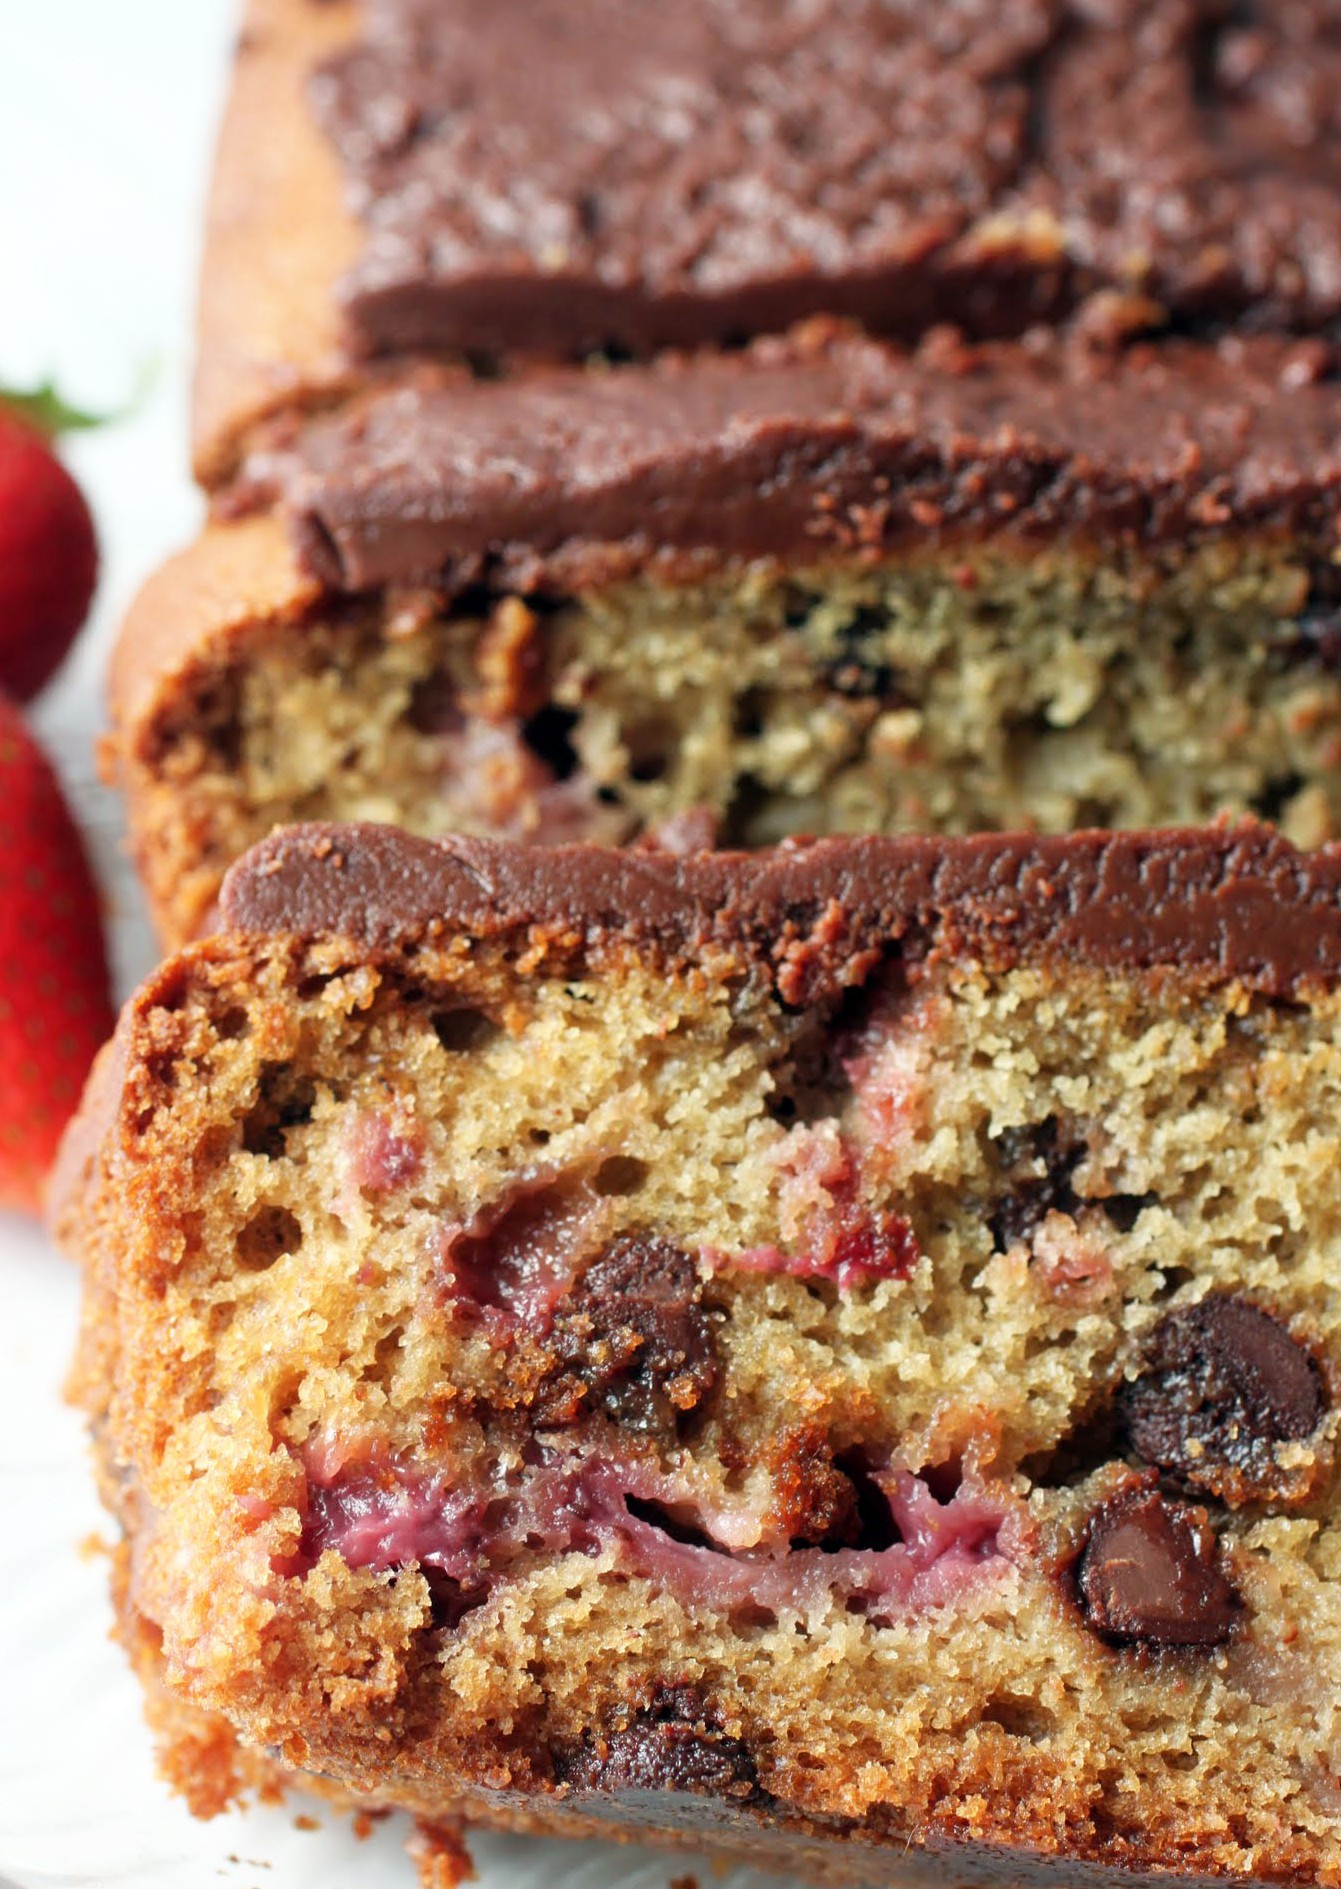 Chocolate-Covered Strawberry Bread